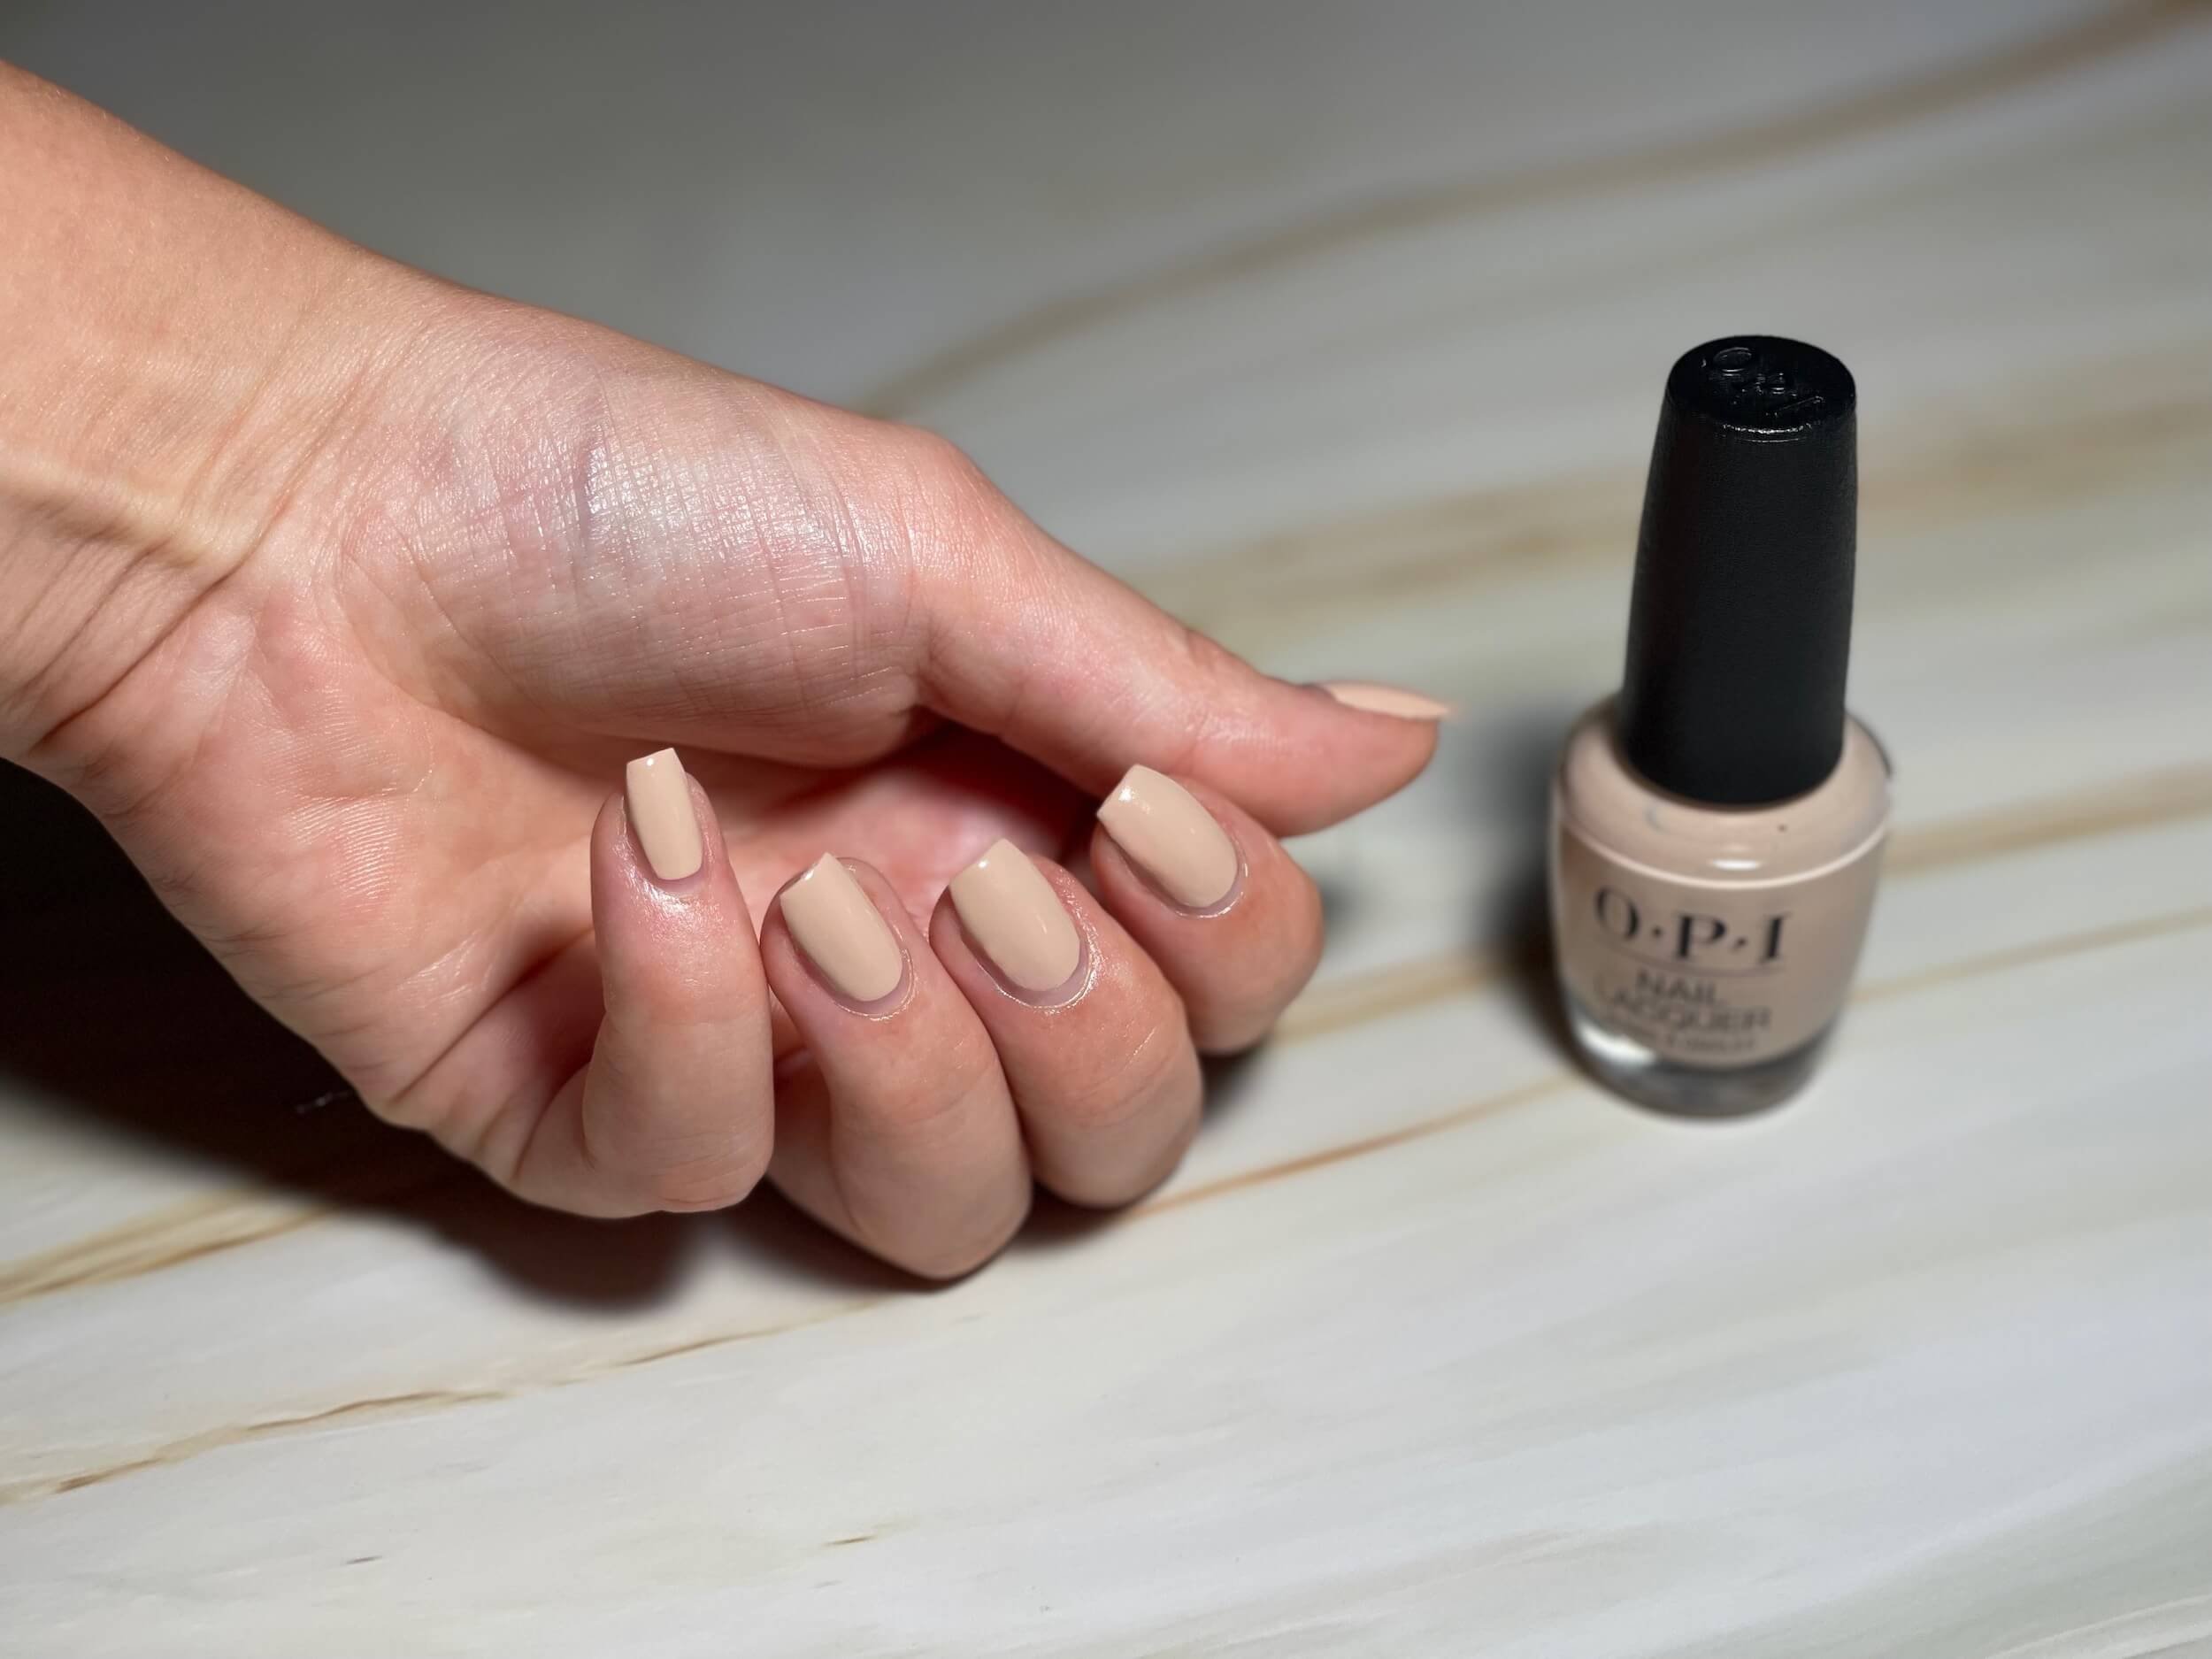 3. OPI GelColor in "Tiramisu for Two" - wide 5